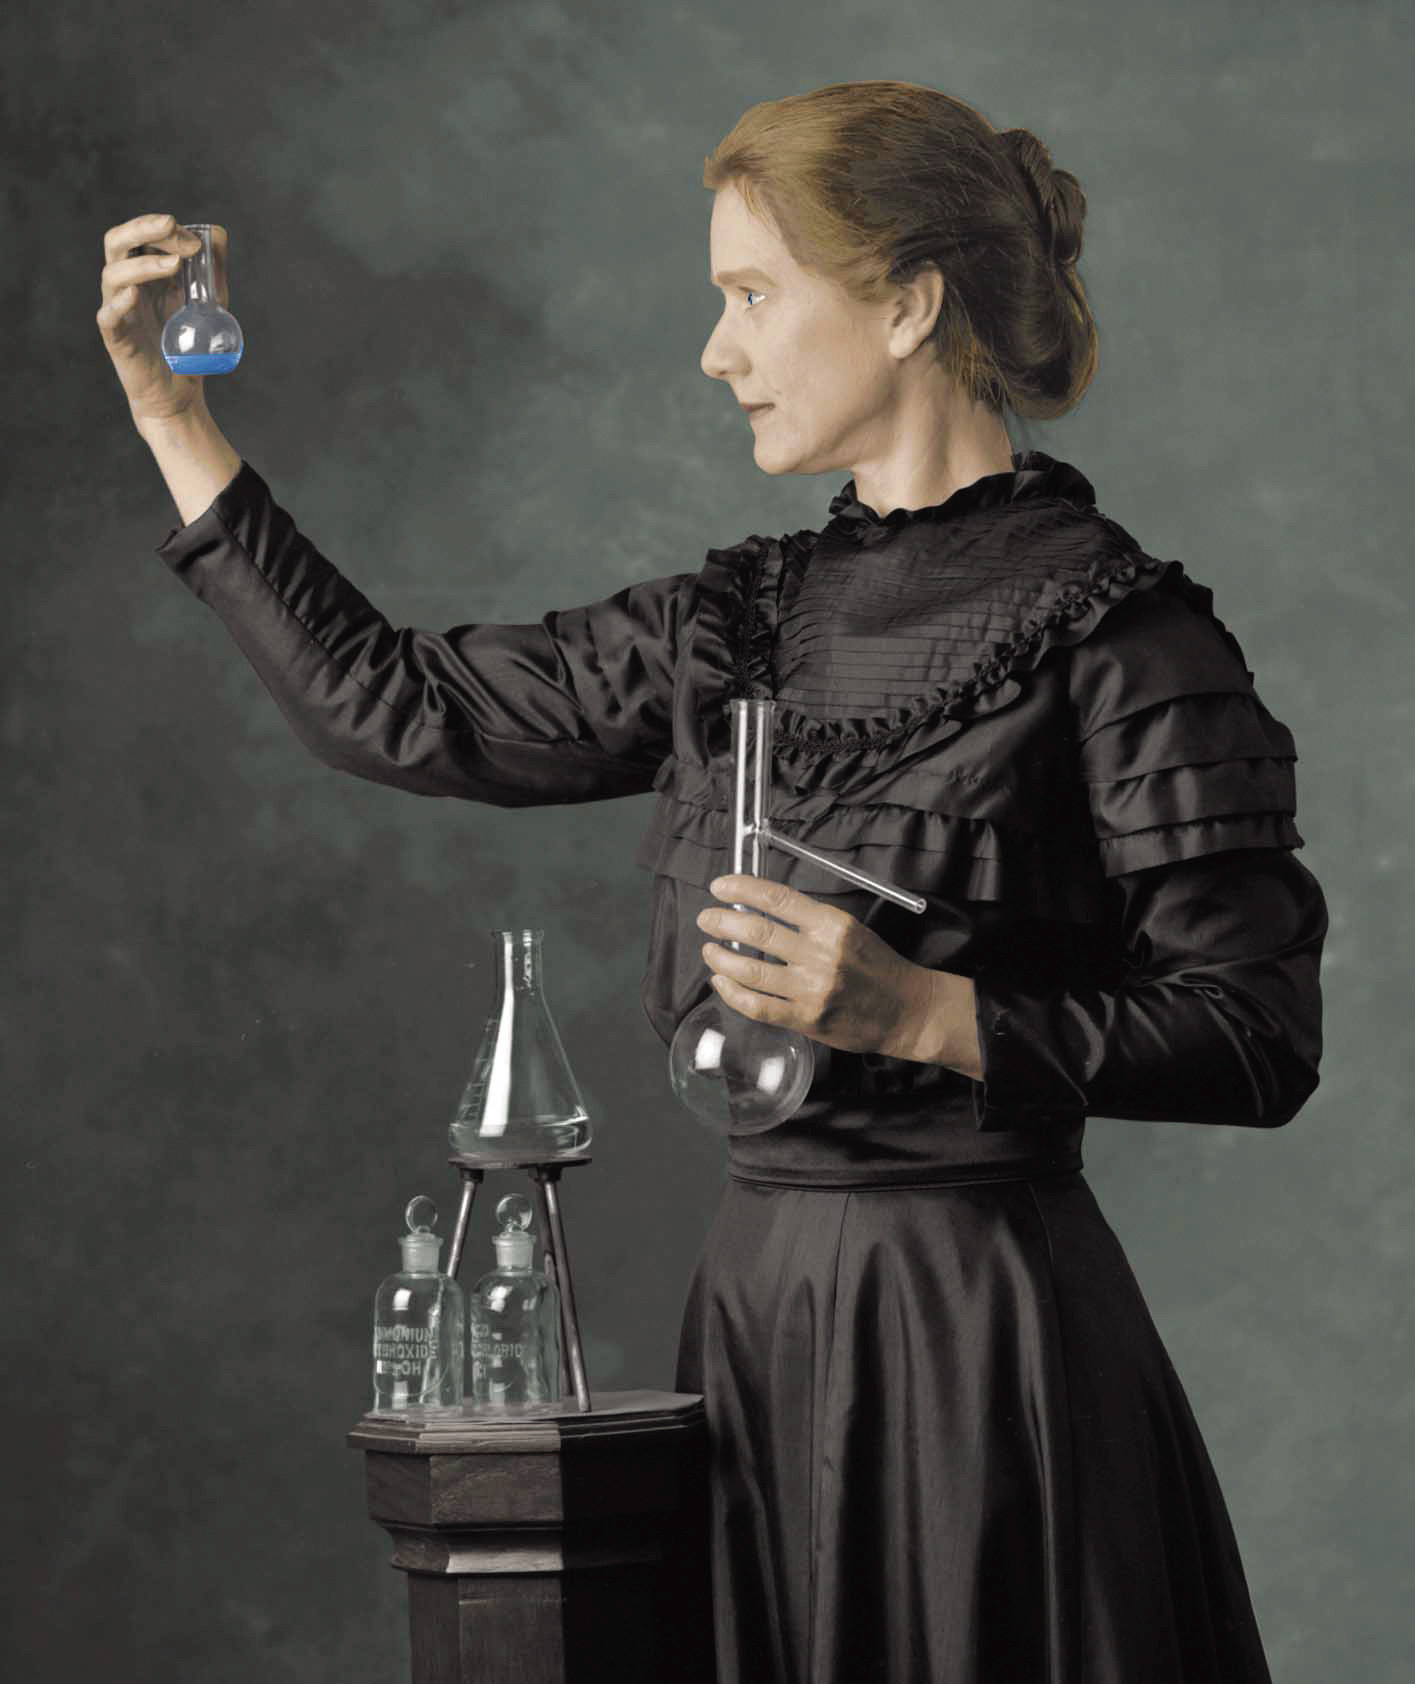 "Marie Curie as portrayed by Susan Marie Frontczak"